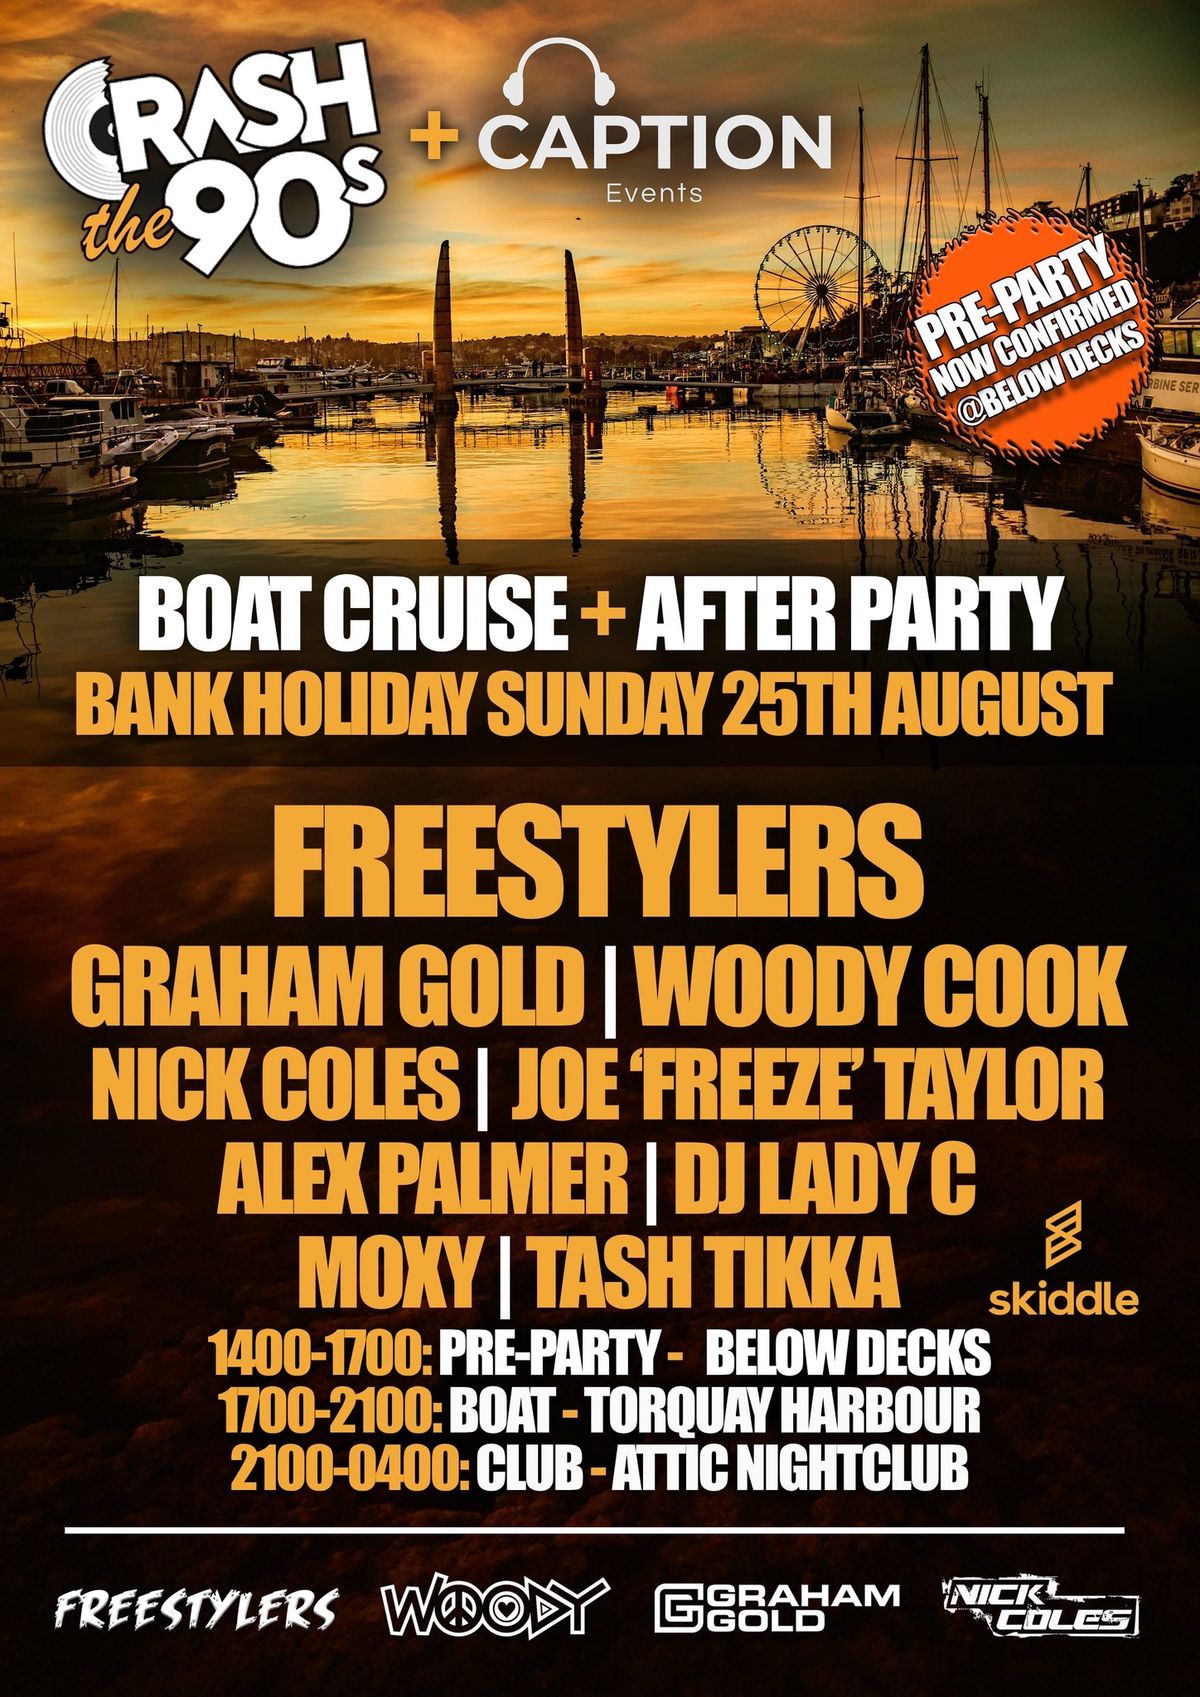 CrashThe90s + Caption Summer Boat Cruise + After Party